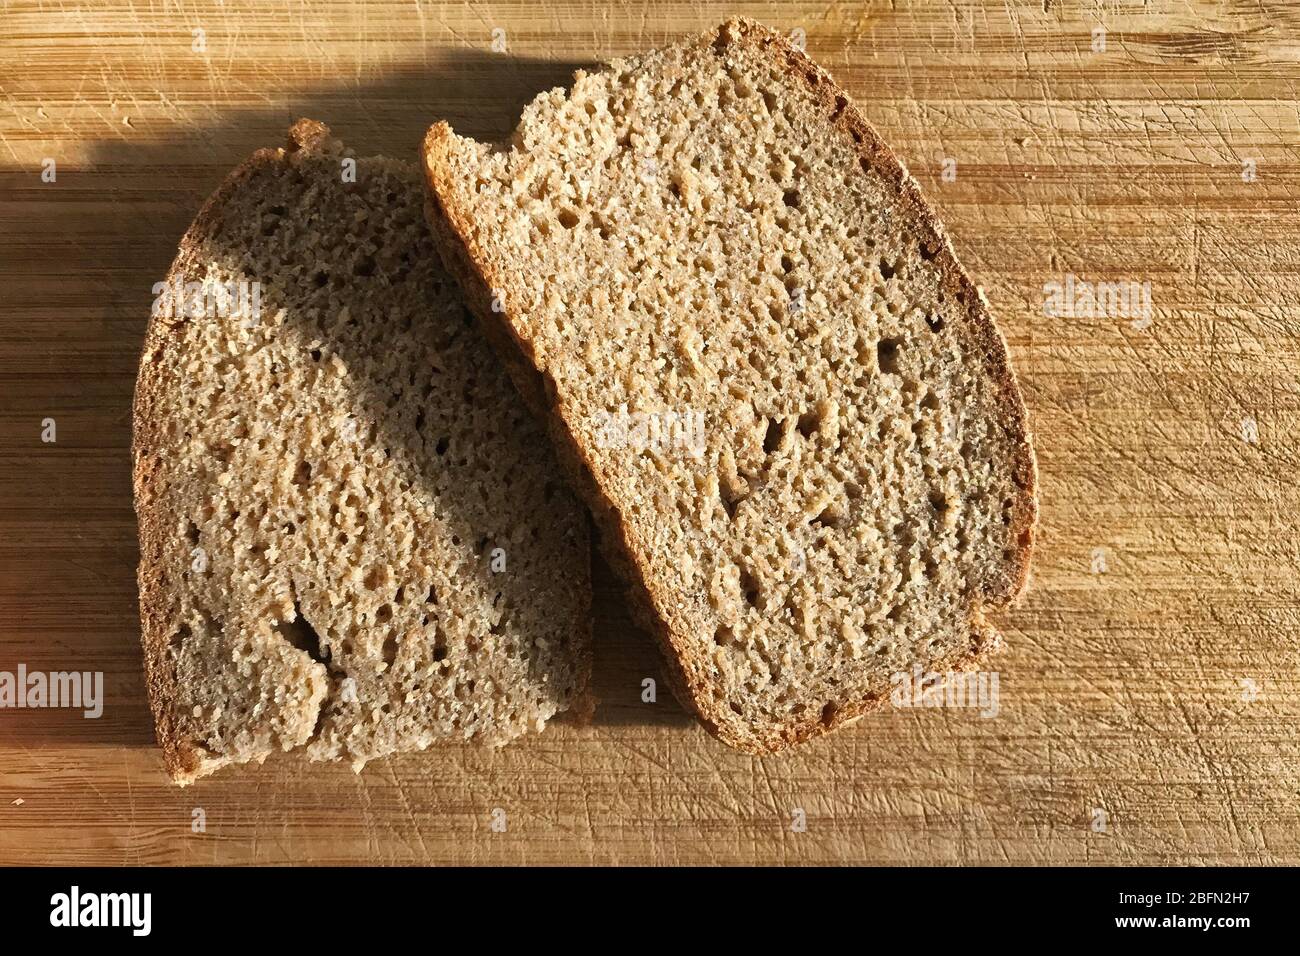 Two slices of rye bread lying on a wooden cutting Board. Stock Photo